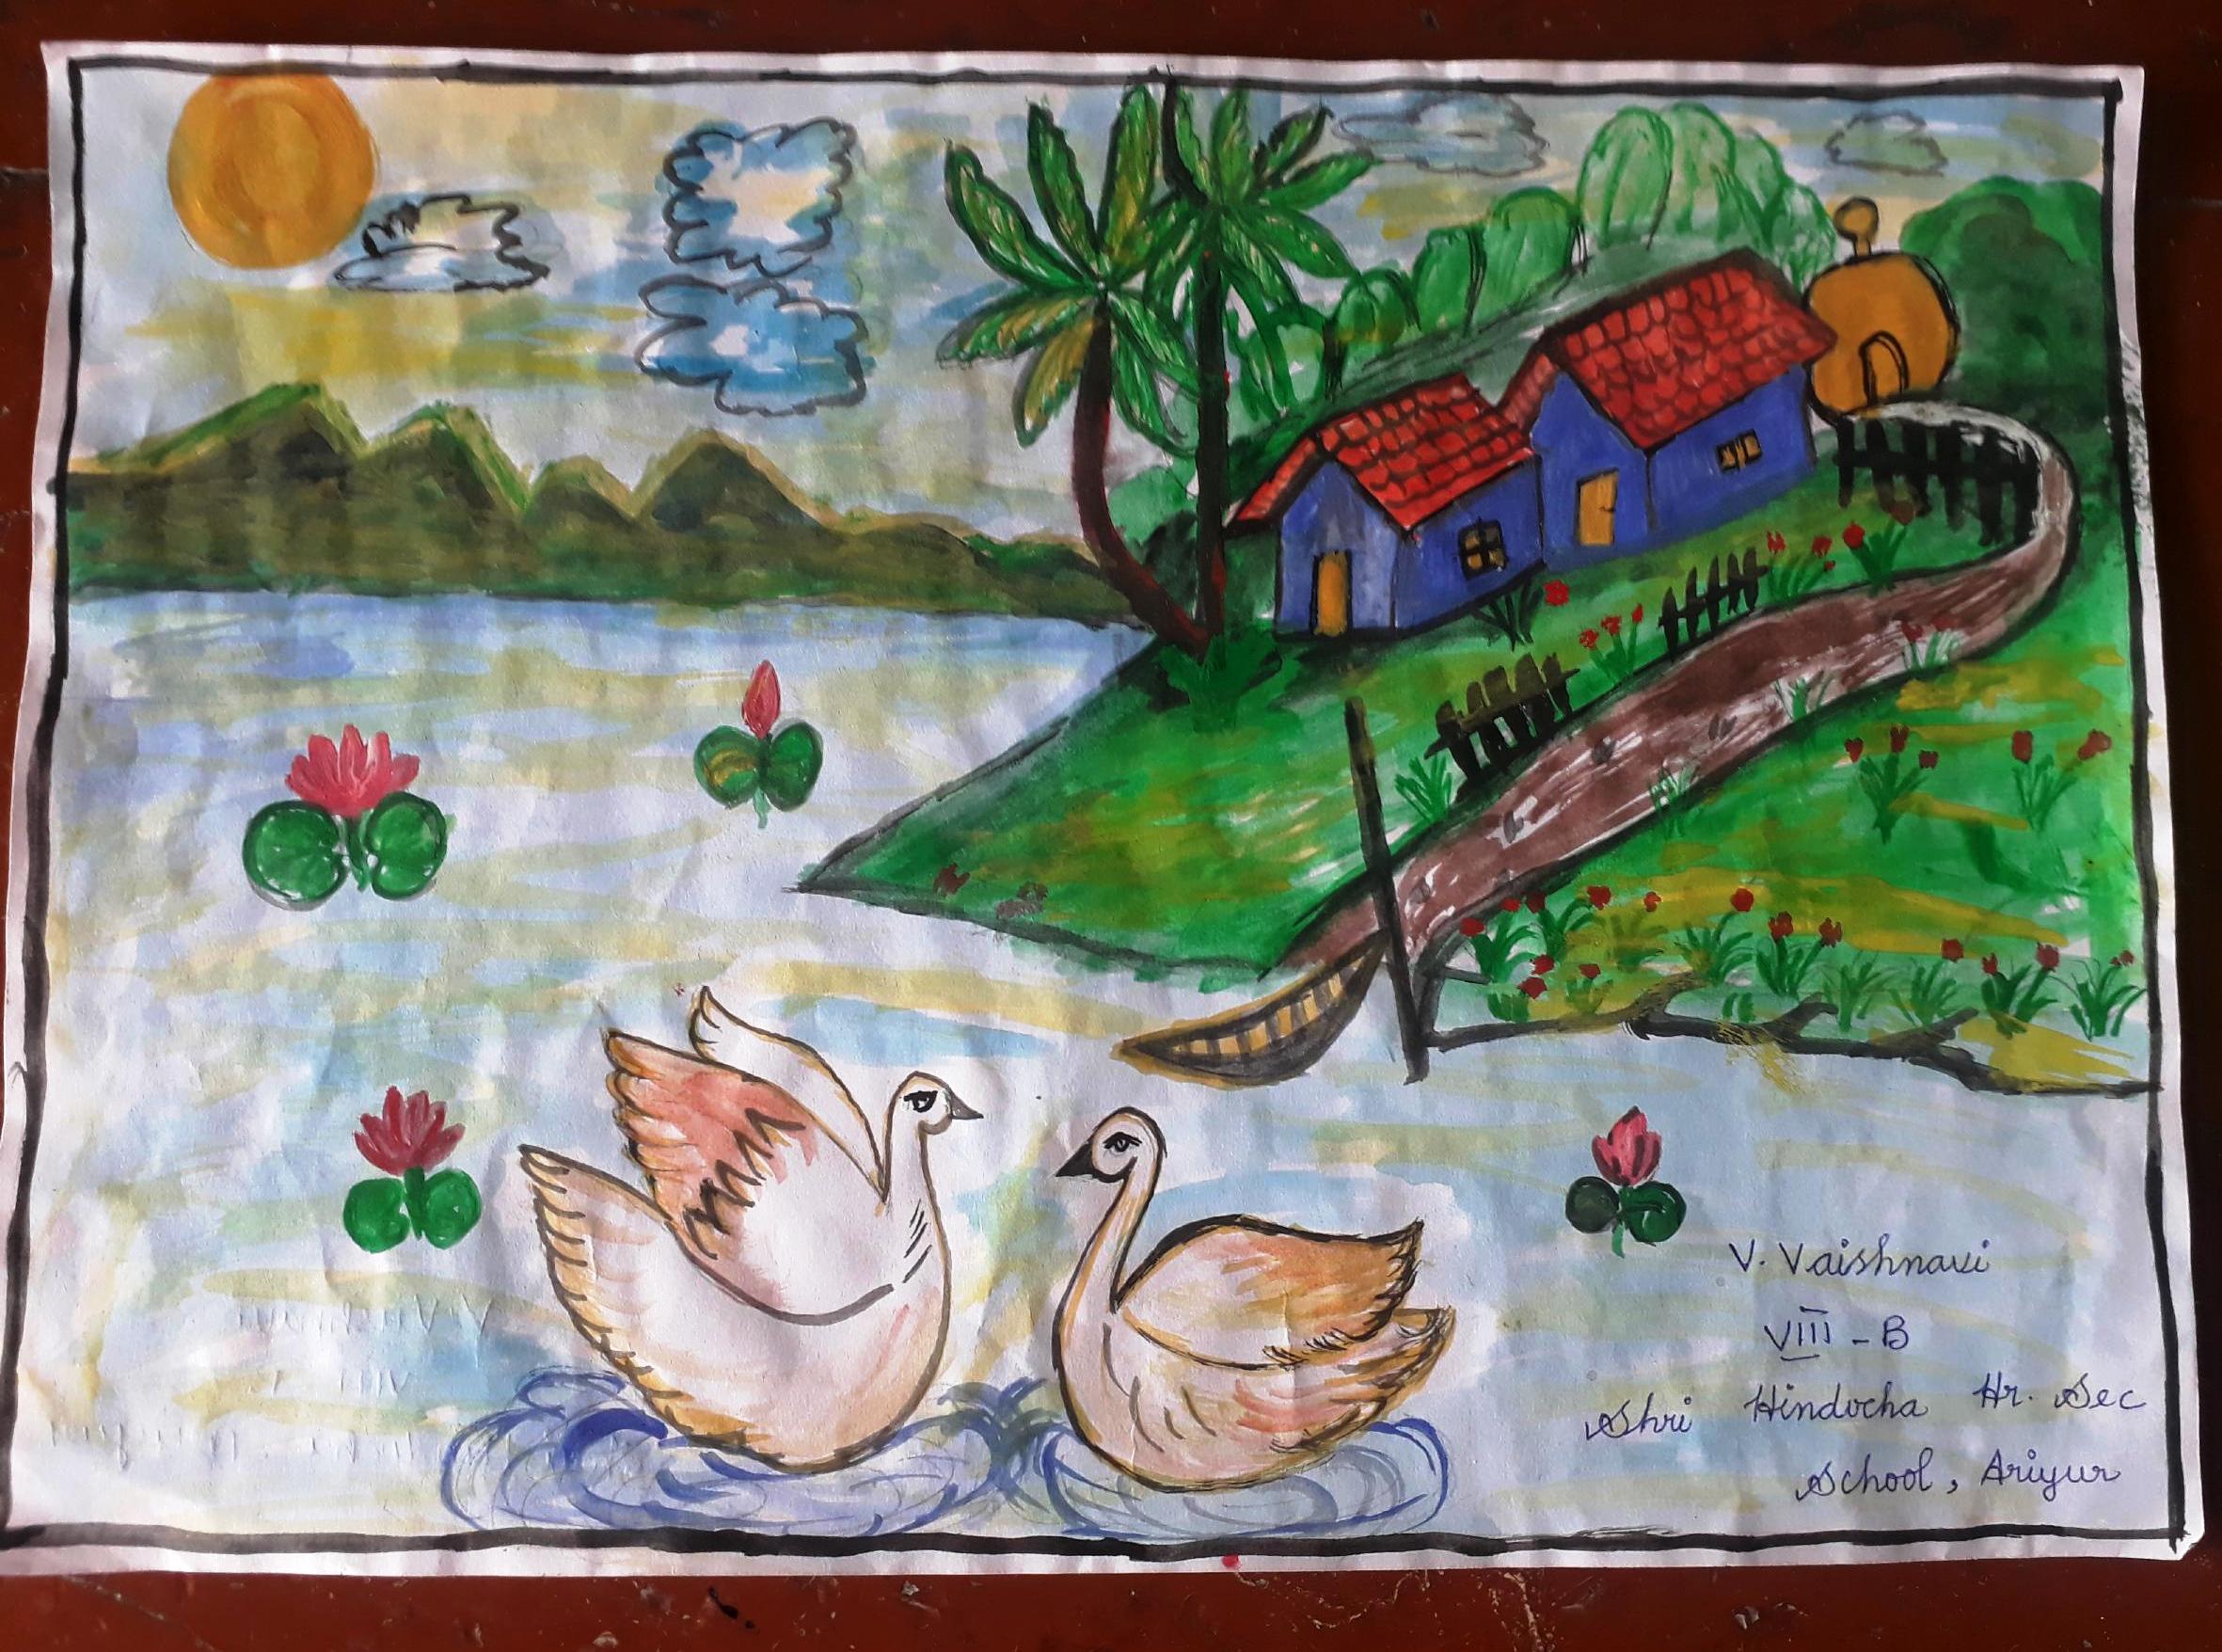 Honouring Our Soldiers through Painting | Rural Development Foundation Blog